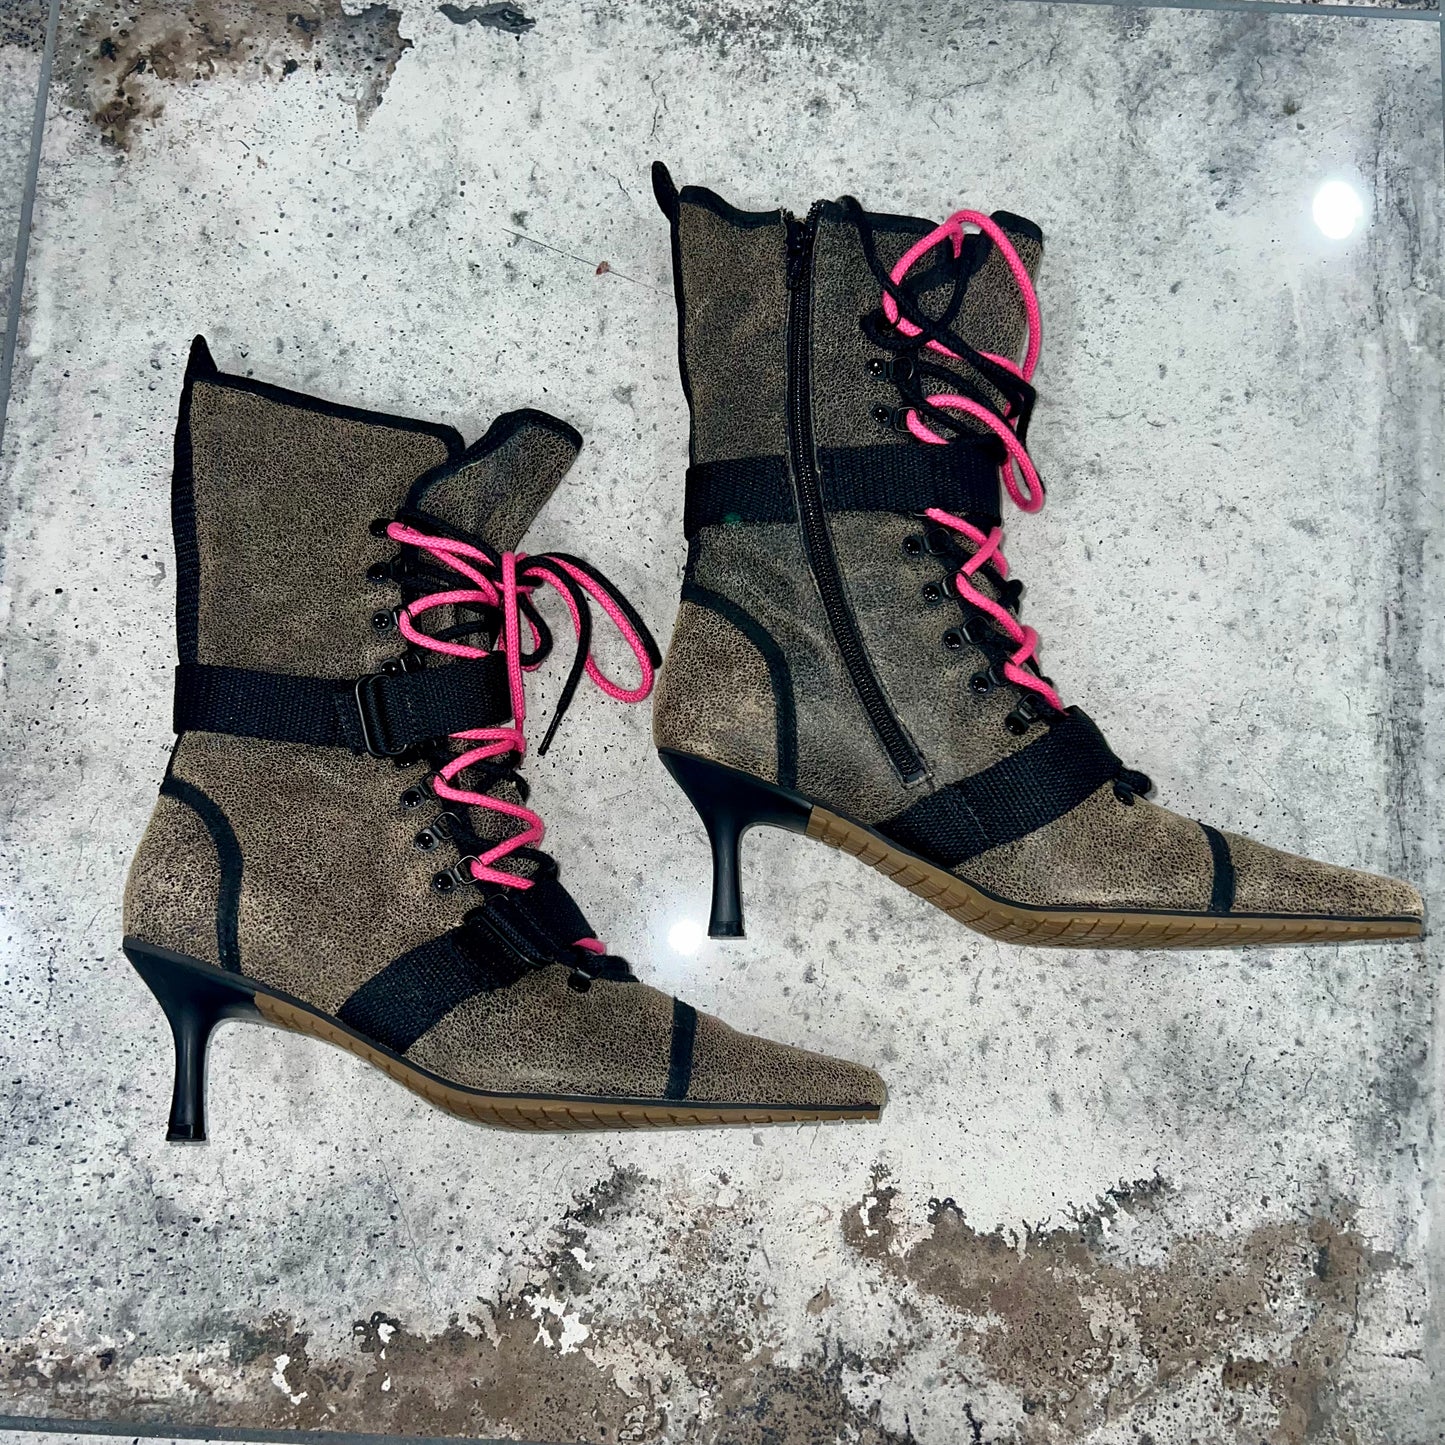 00s 'Diesel' Lace Up Boots